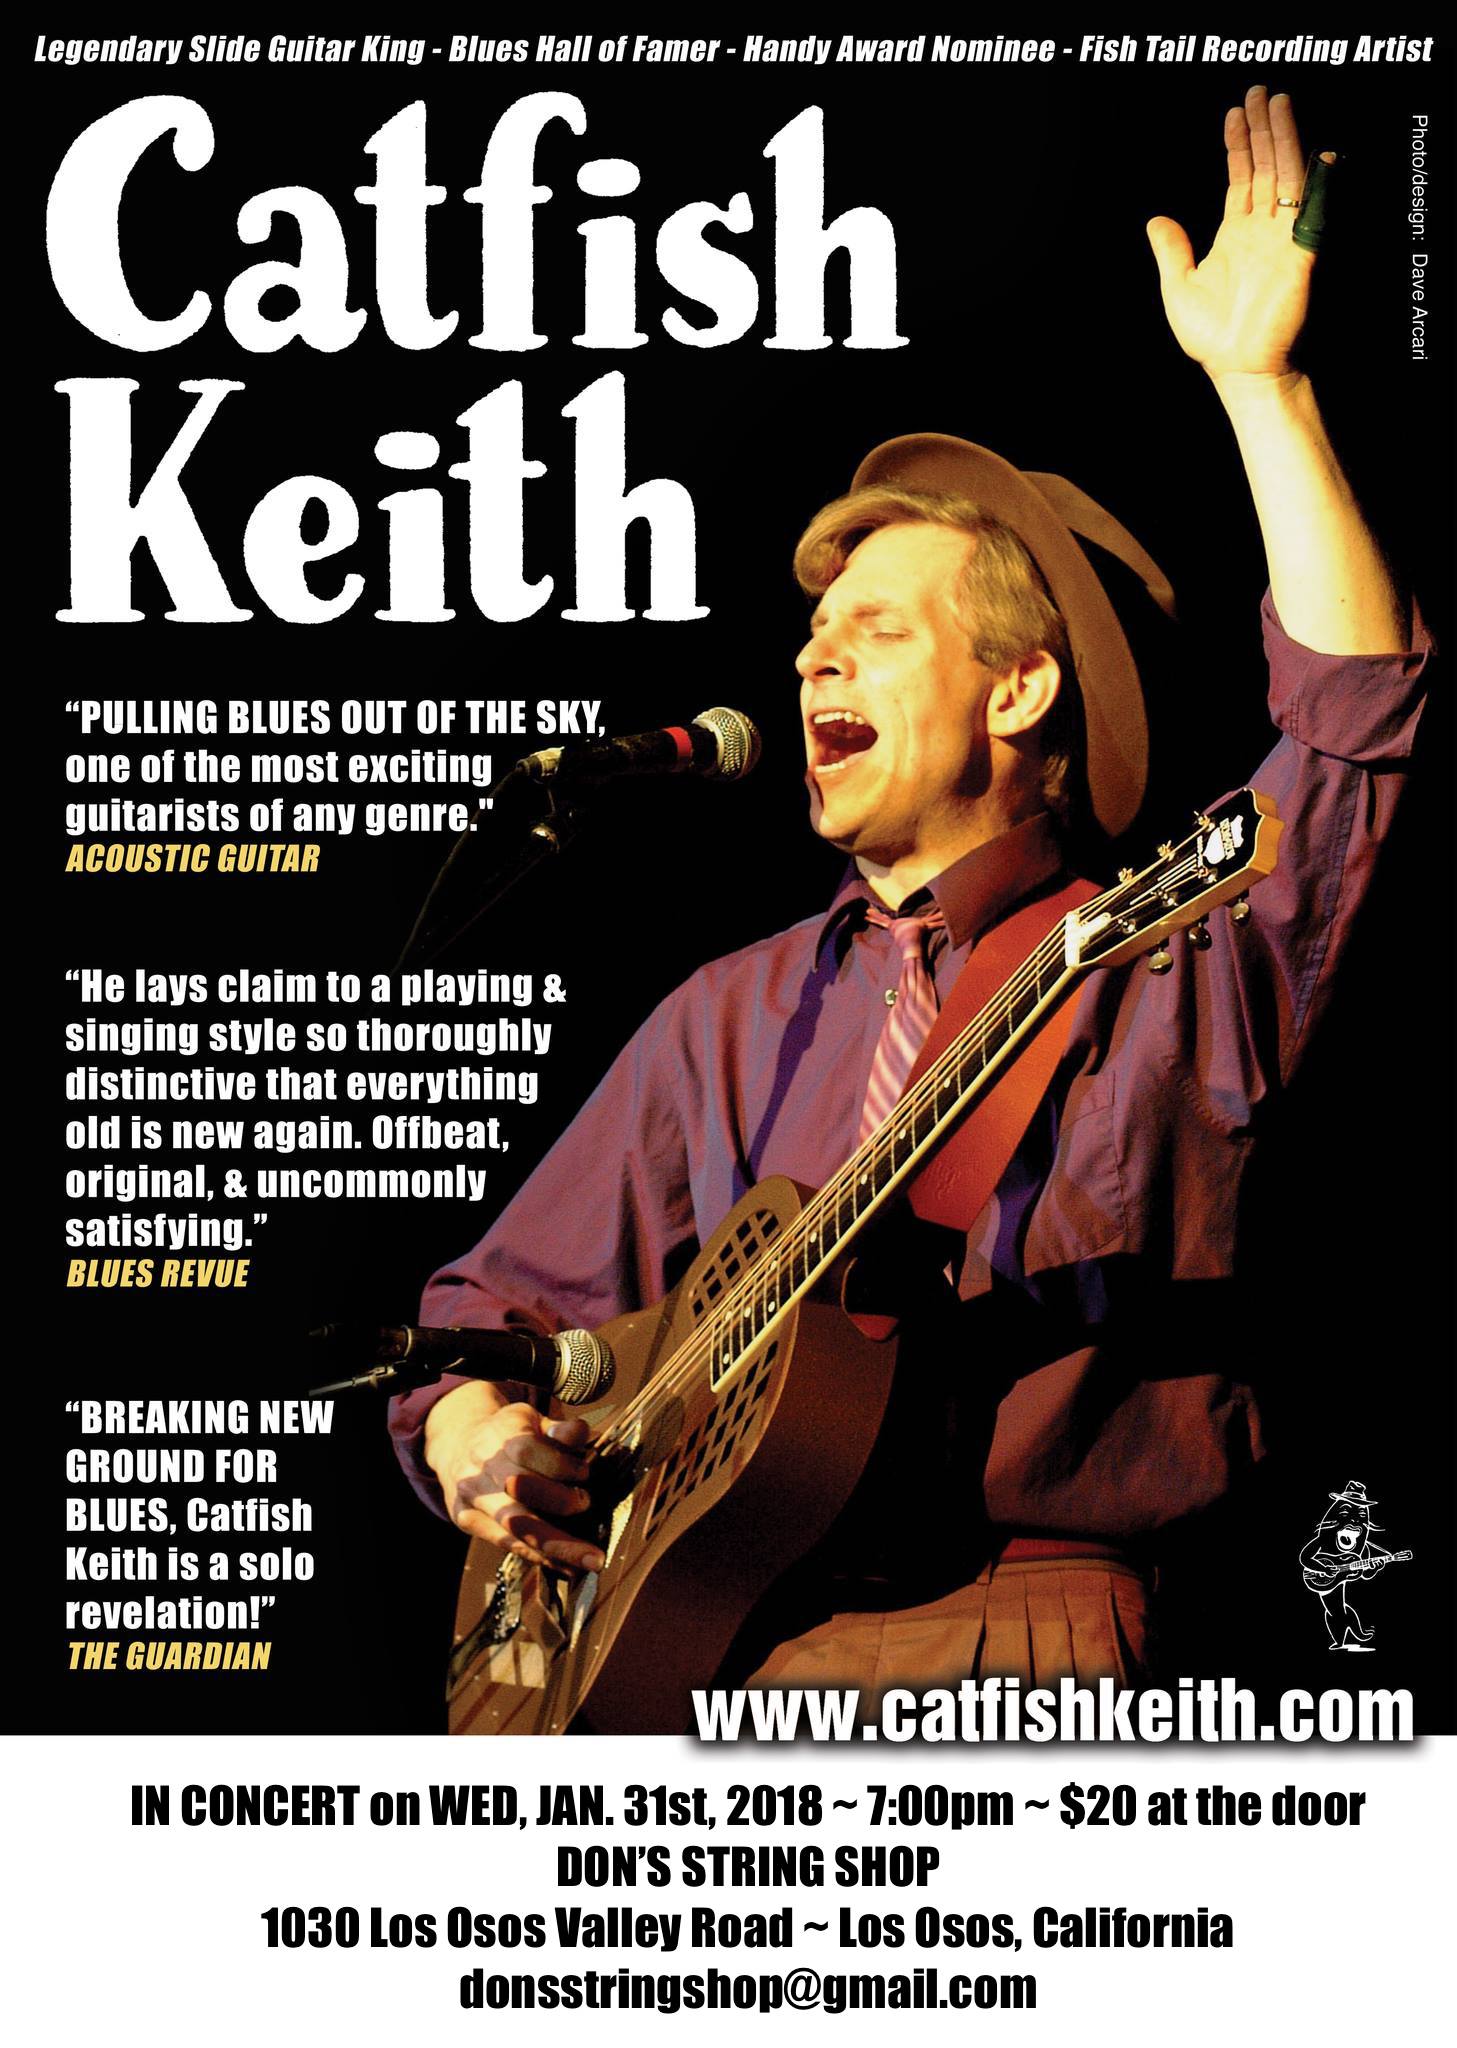 Catfish Keith Poster for Don's String Shop, Jan. 31, 2018